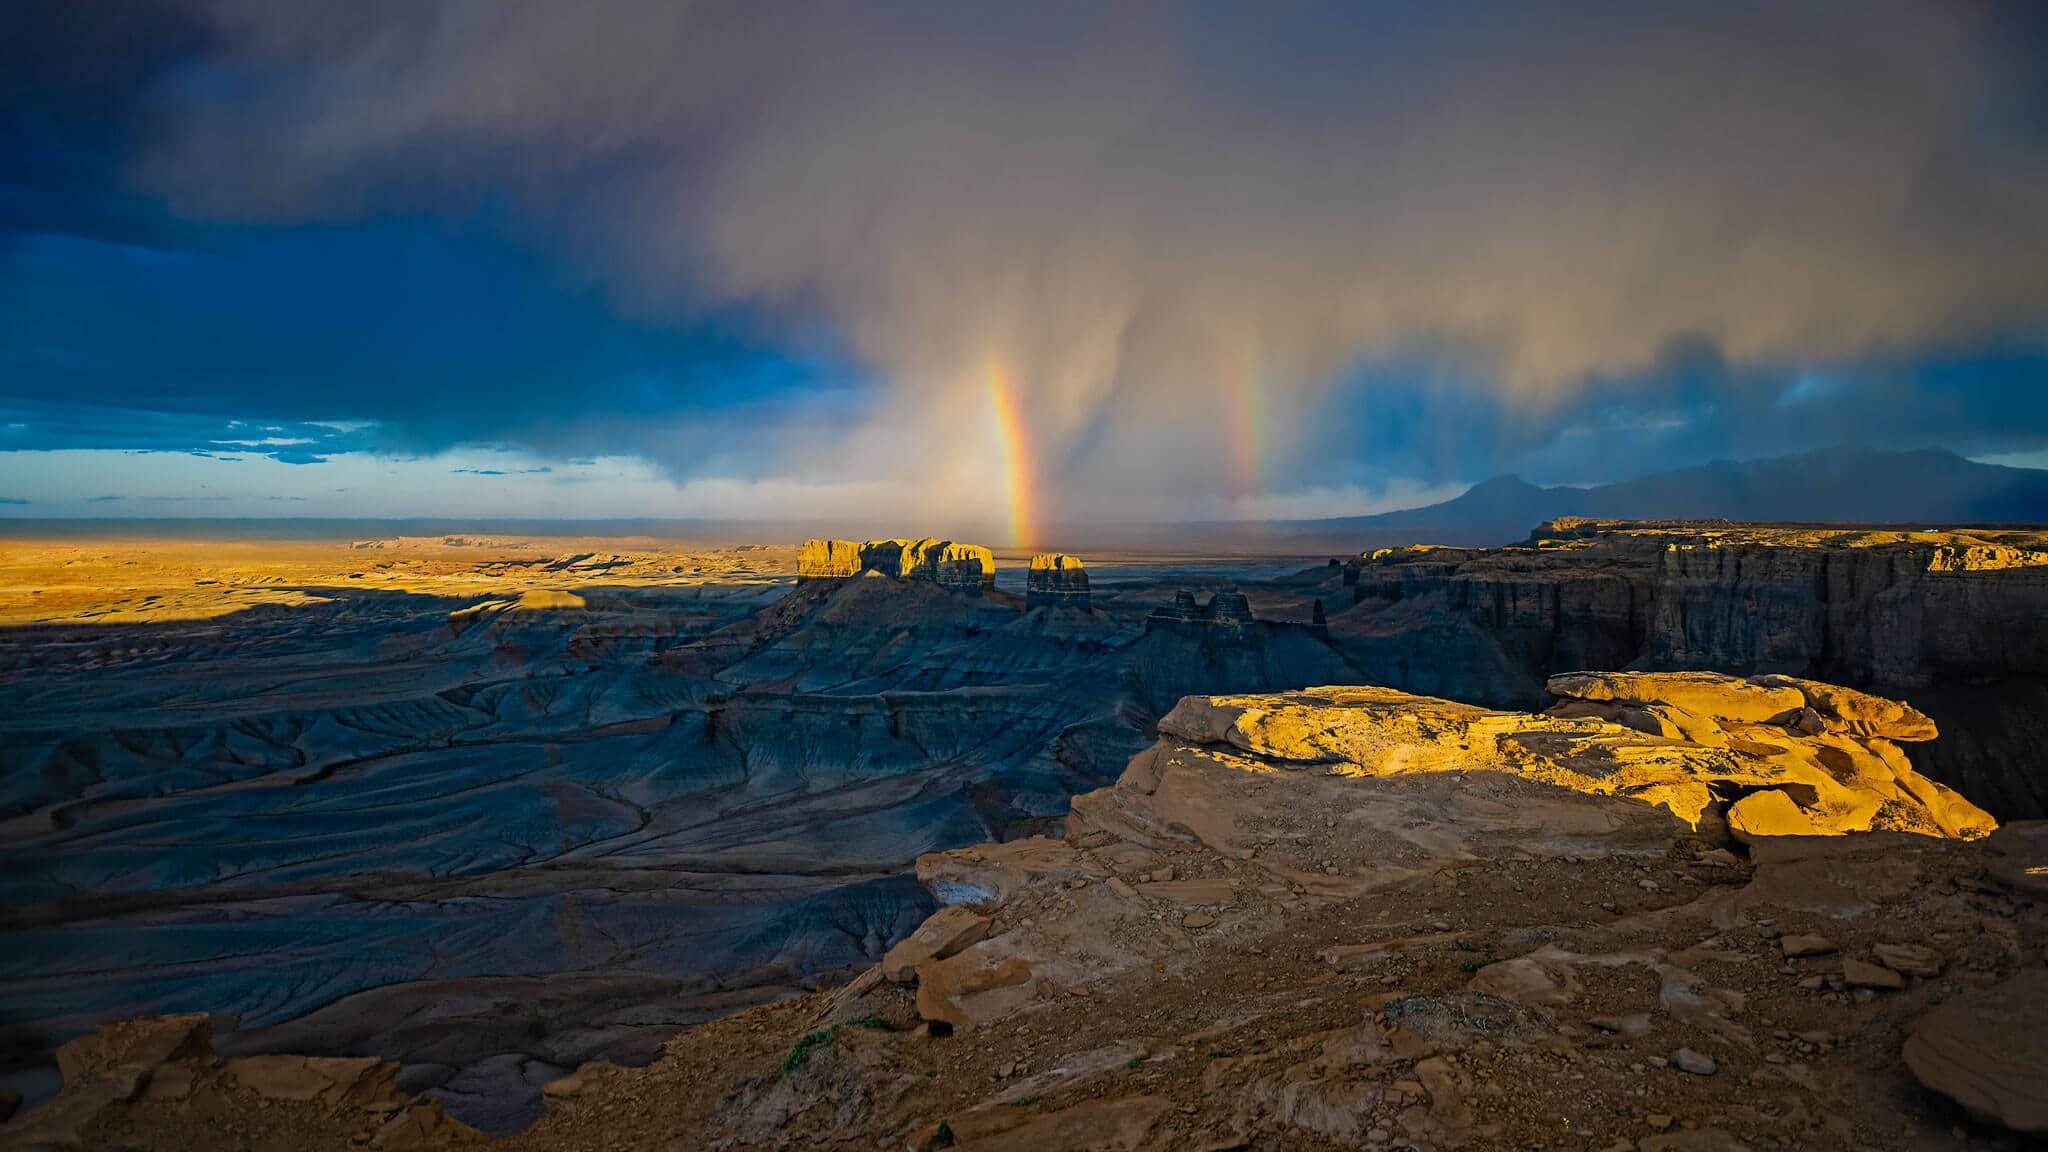 Rainbow from a storm over a Utah Canyon